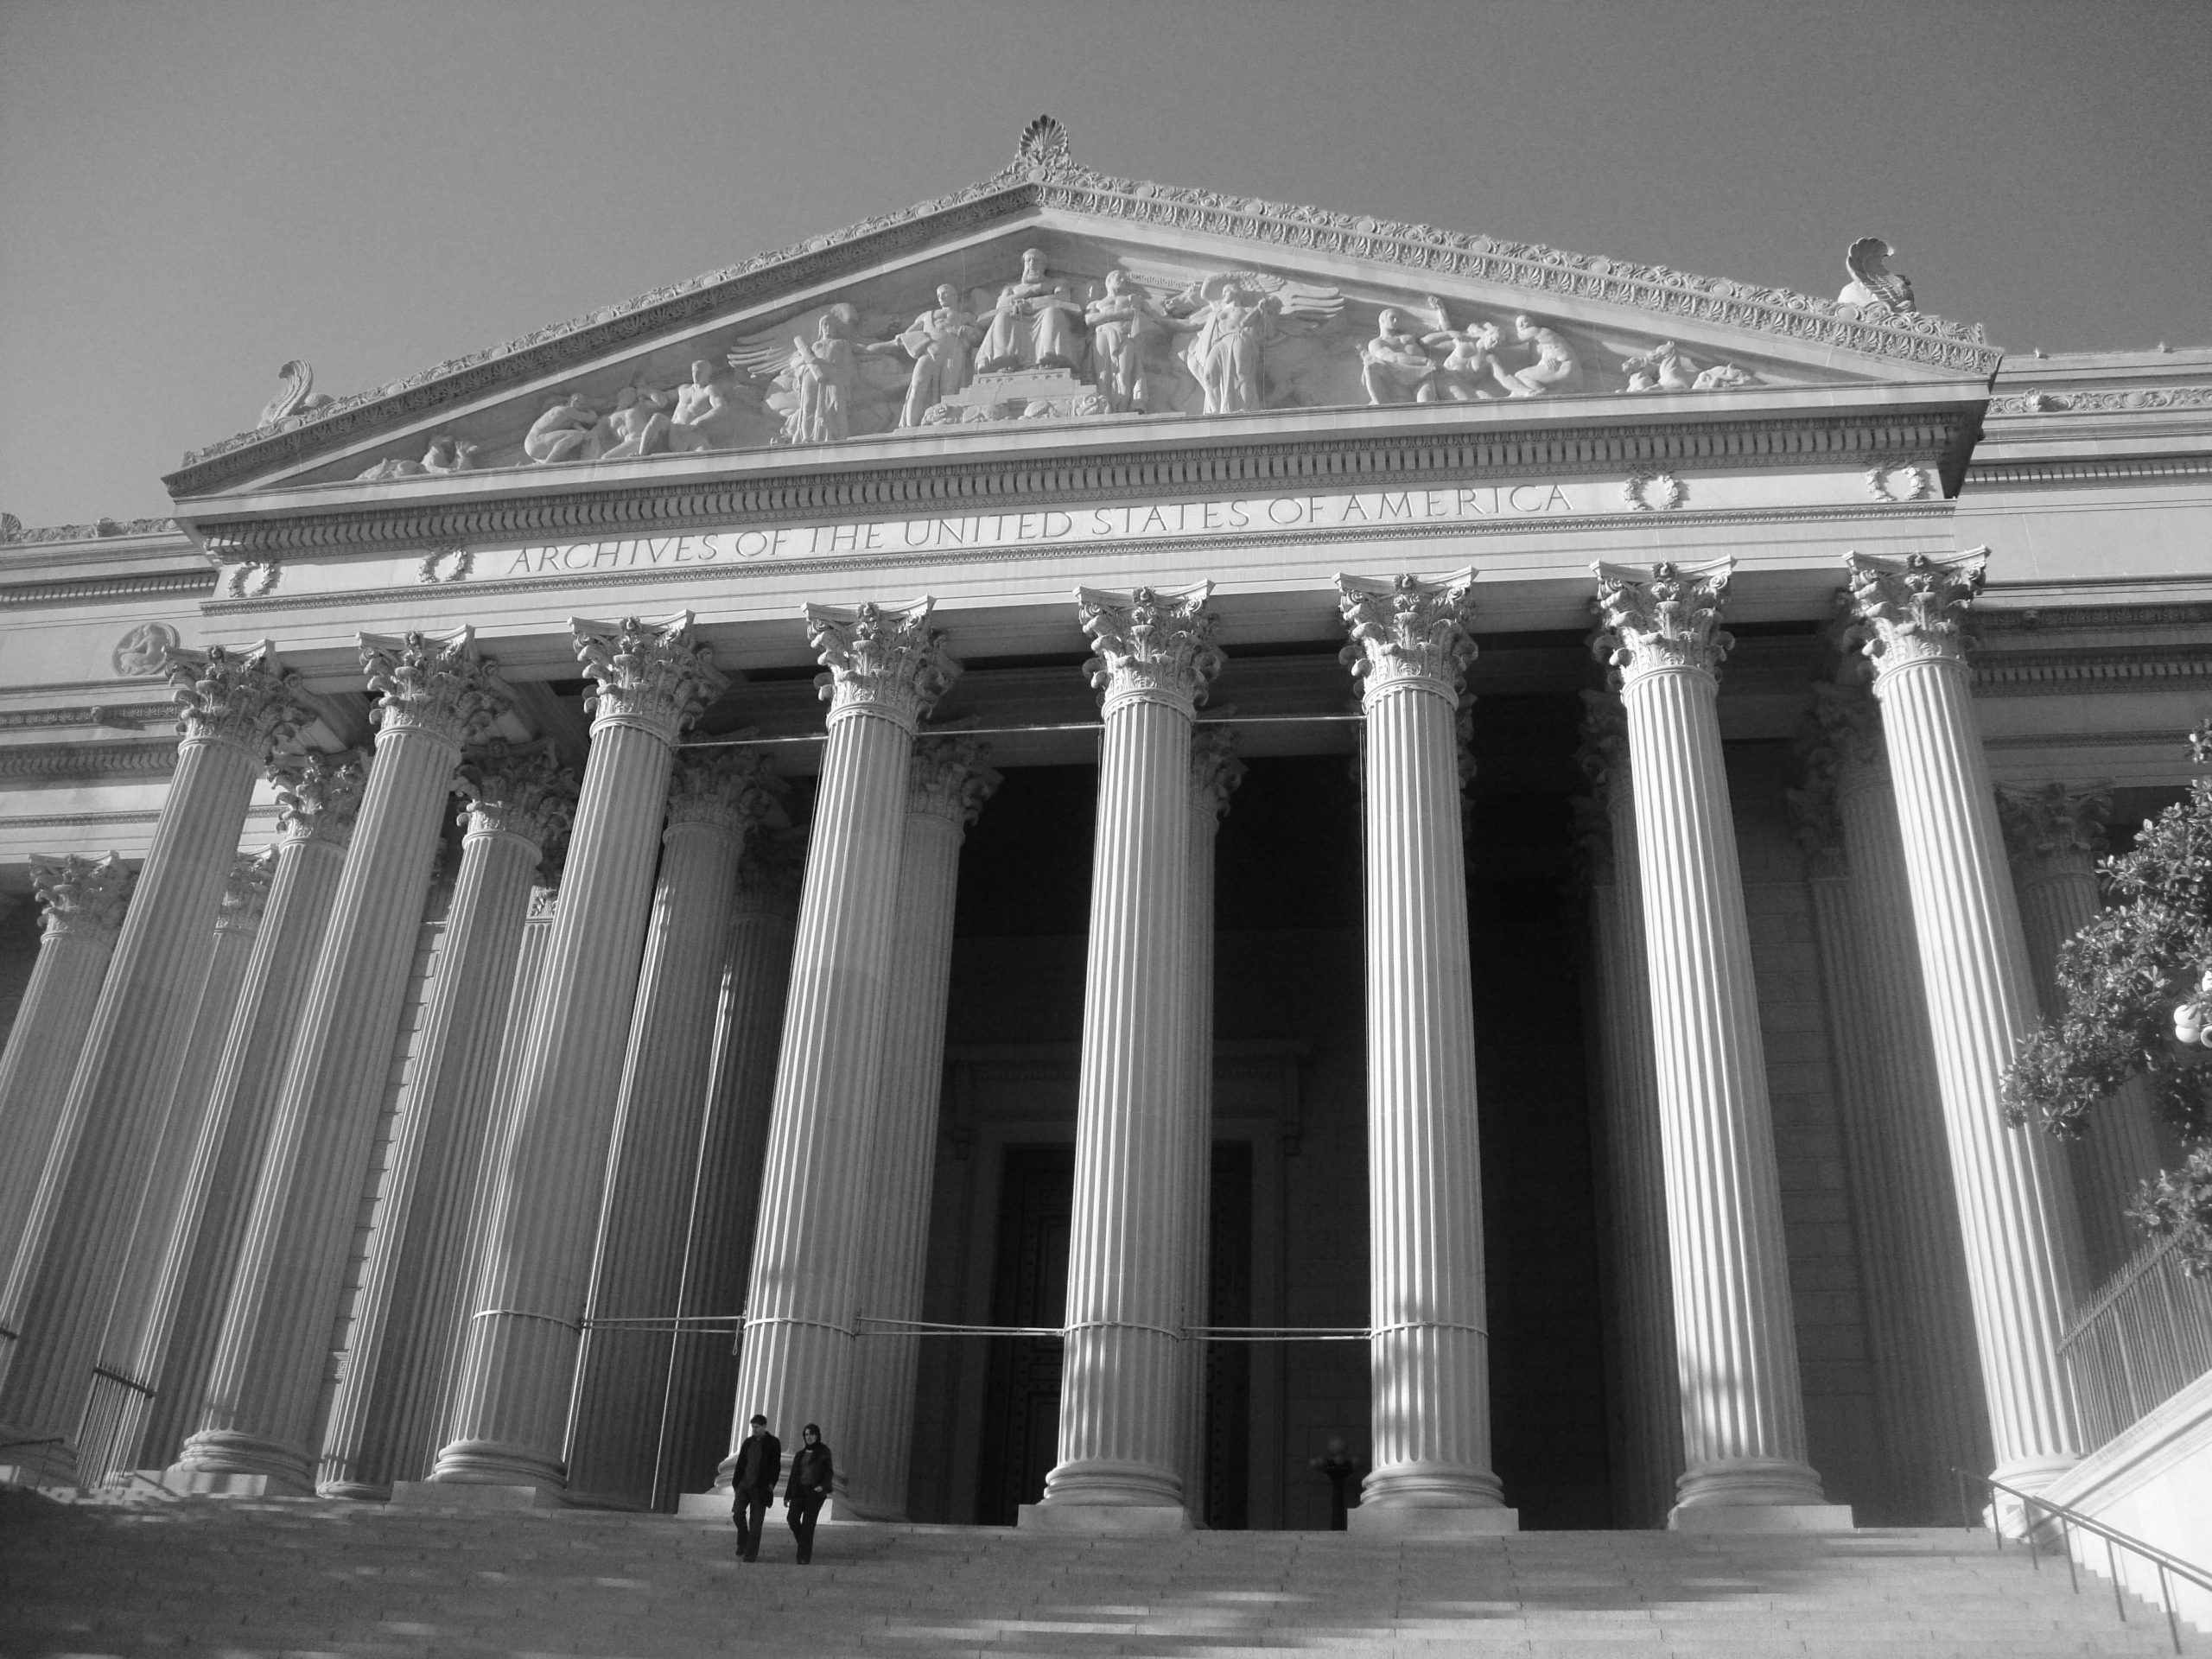 Black and white image looking up at the temple-like facade of the National Archives building in Washington, DC.